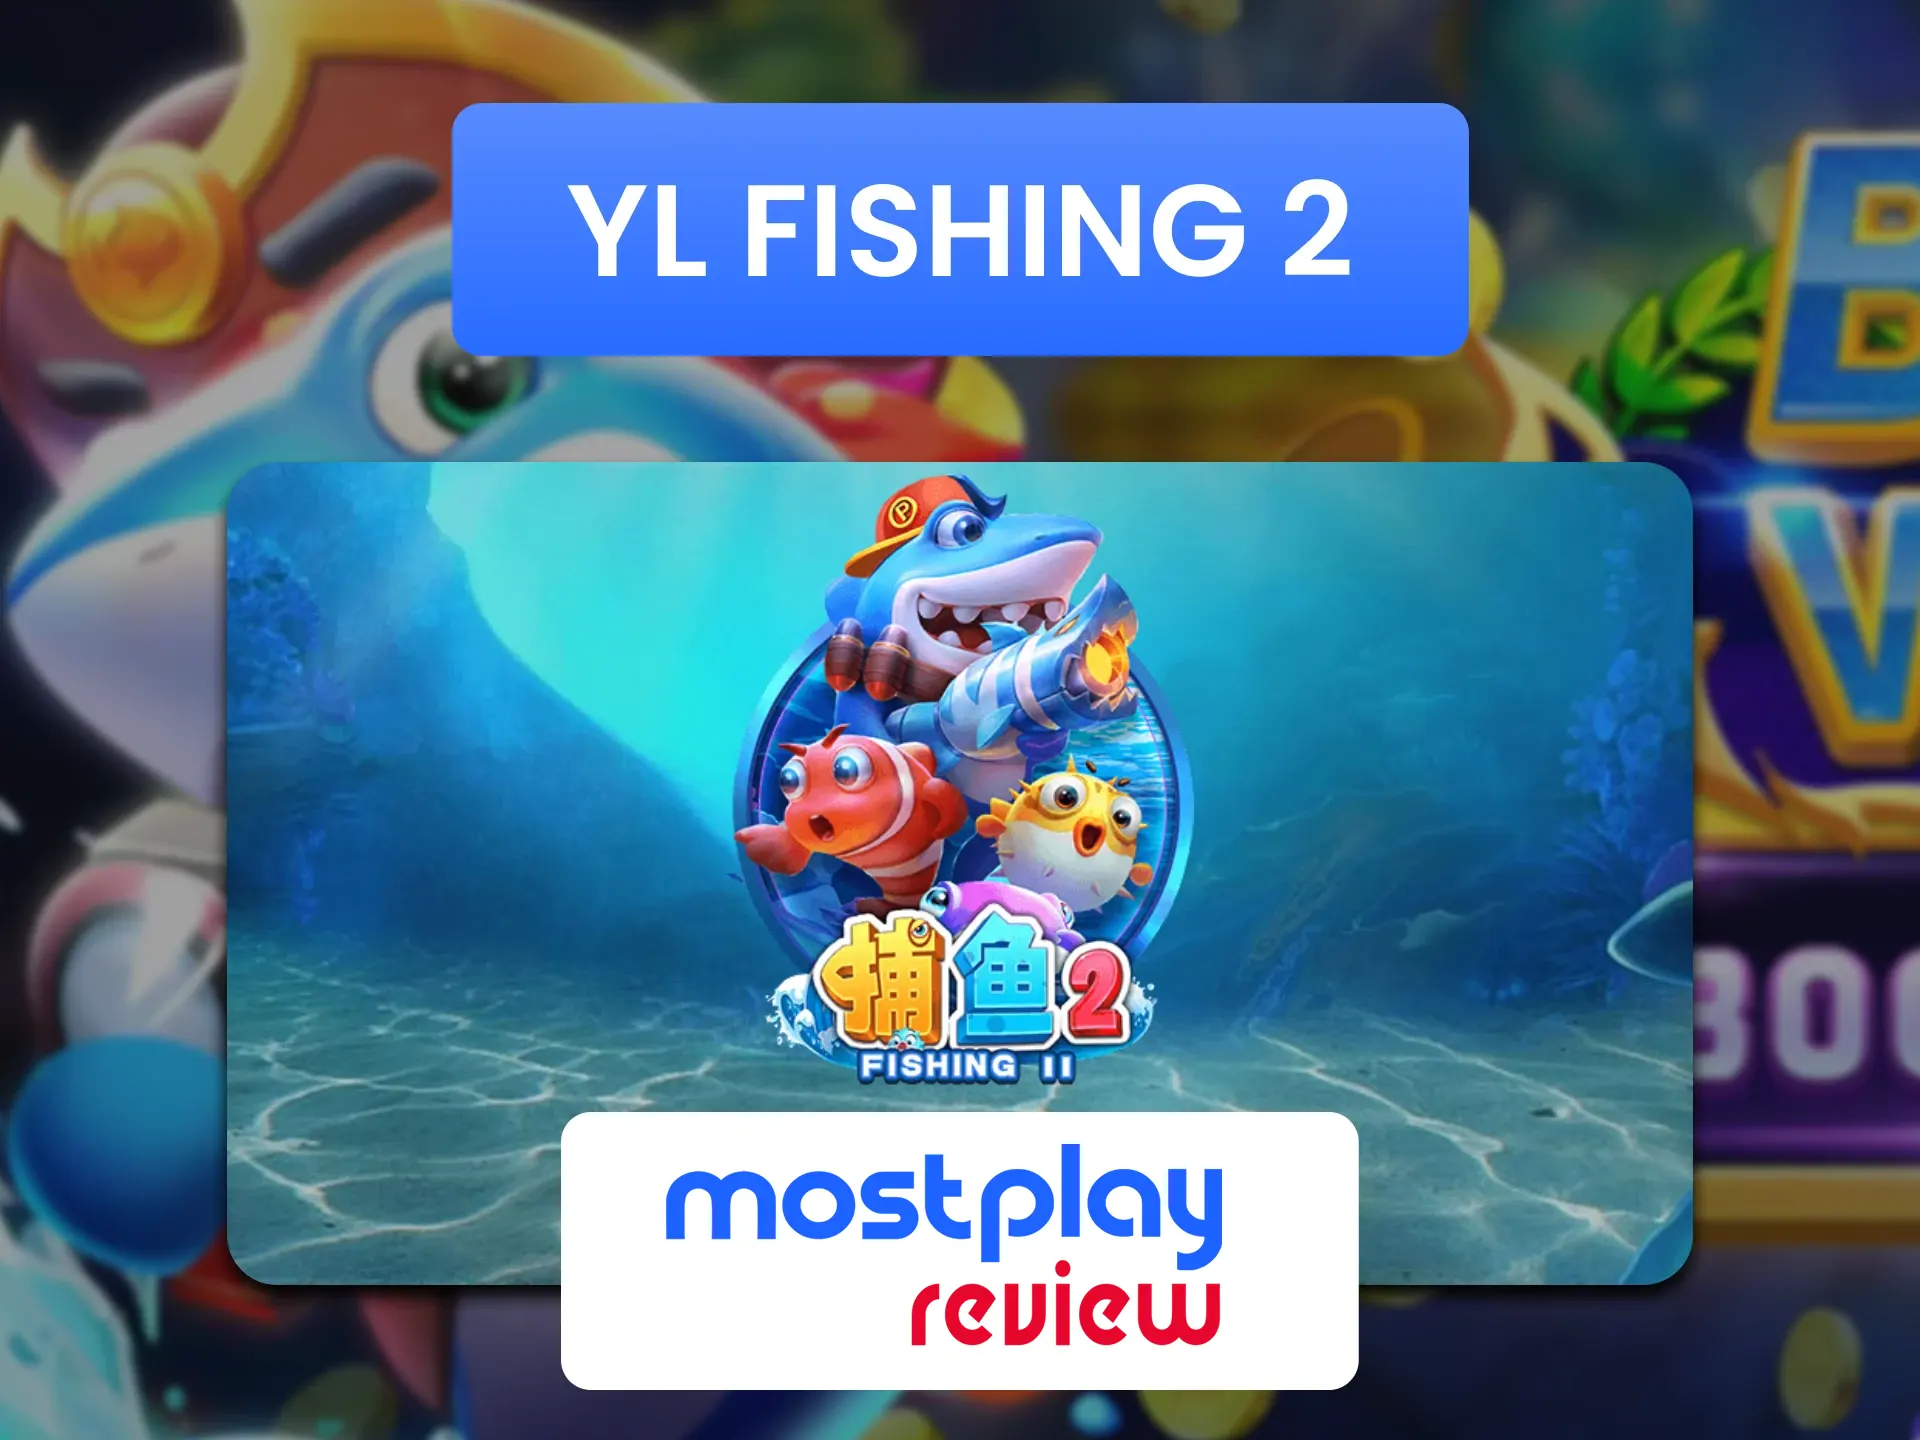 Be patient when playing the Fishing 2 game at the Mostplay.